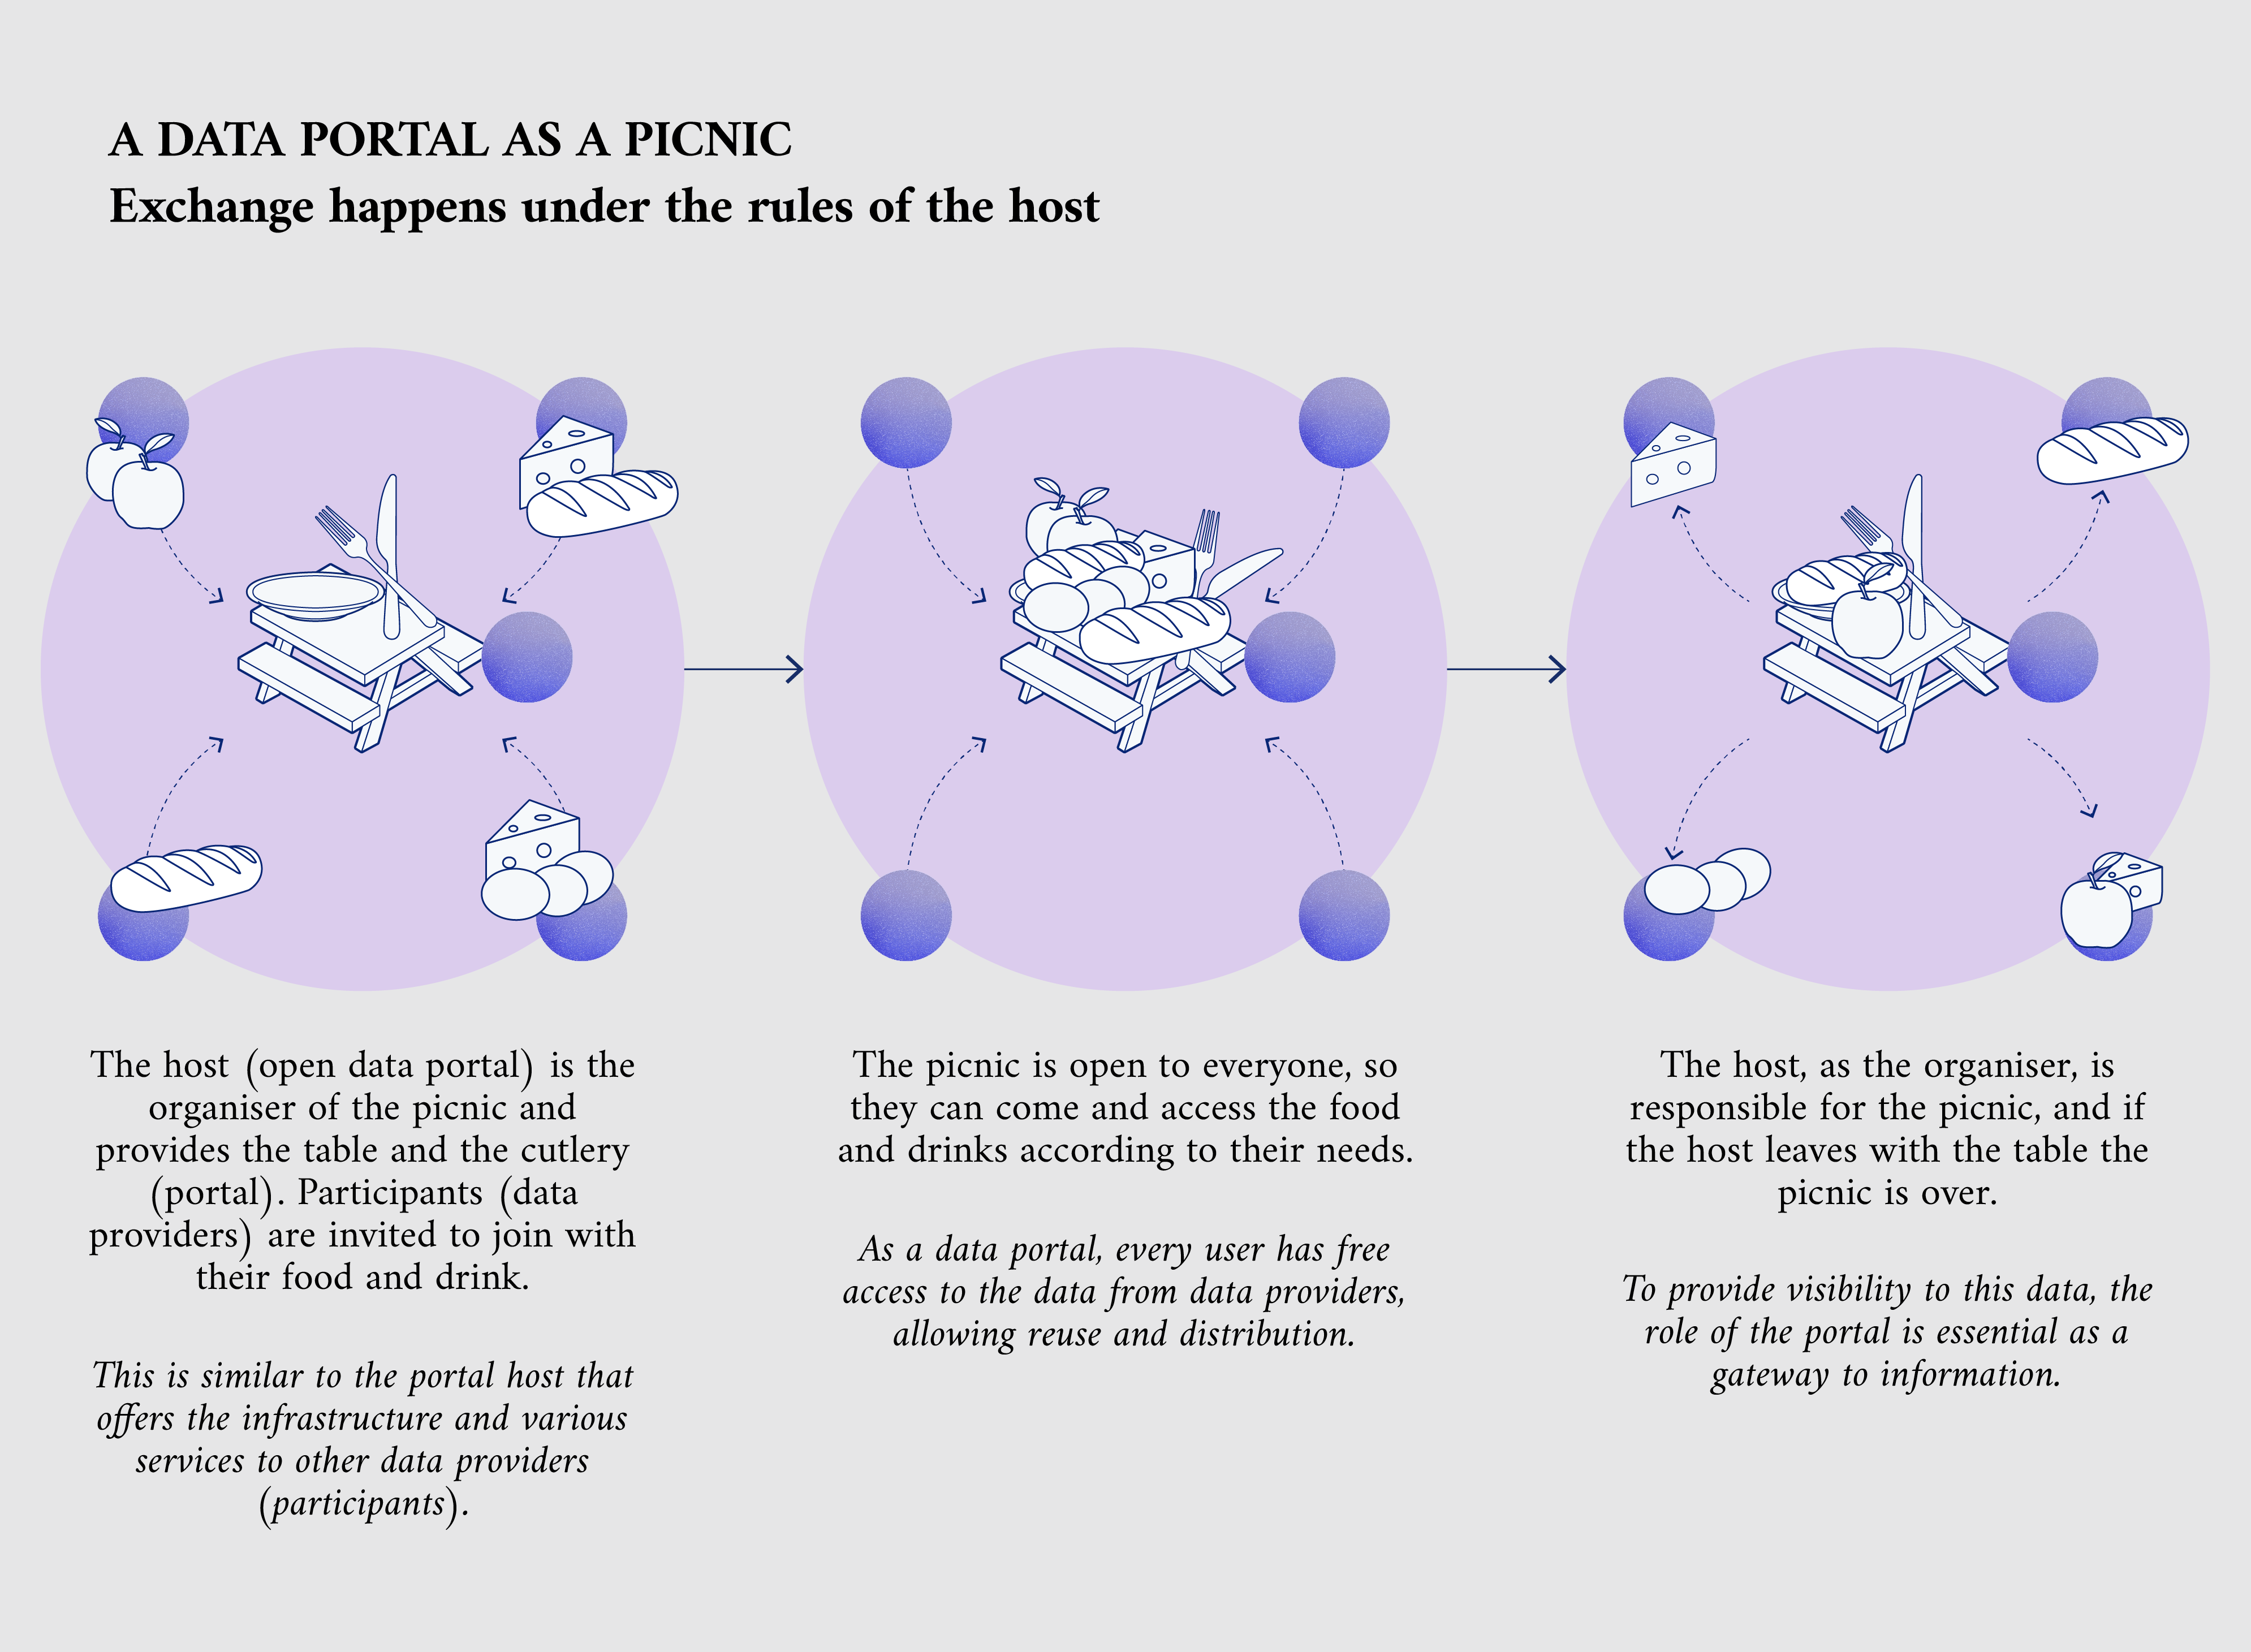 An analogy for data portals as a picnic